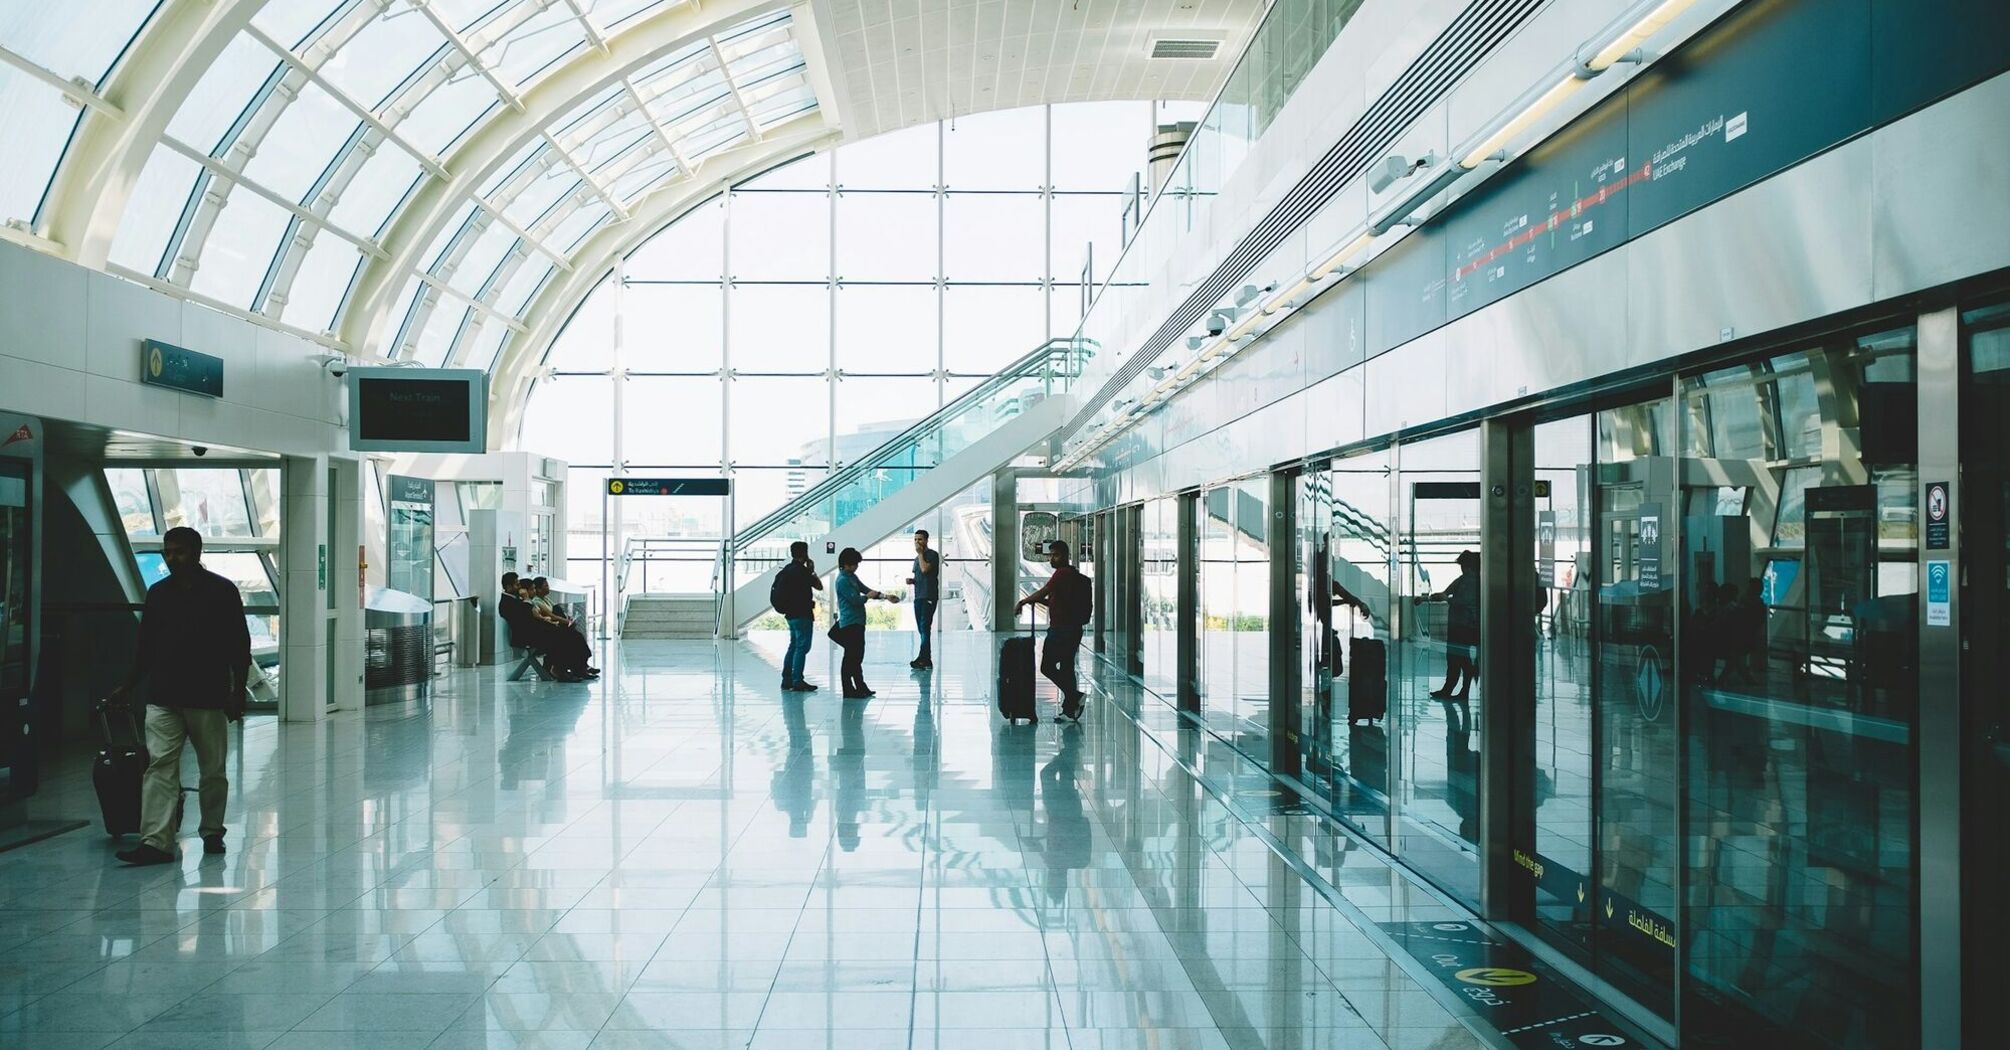 Interior of Dubai airport with passengers and luggage